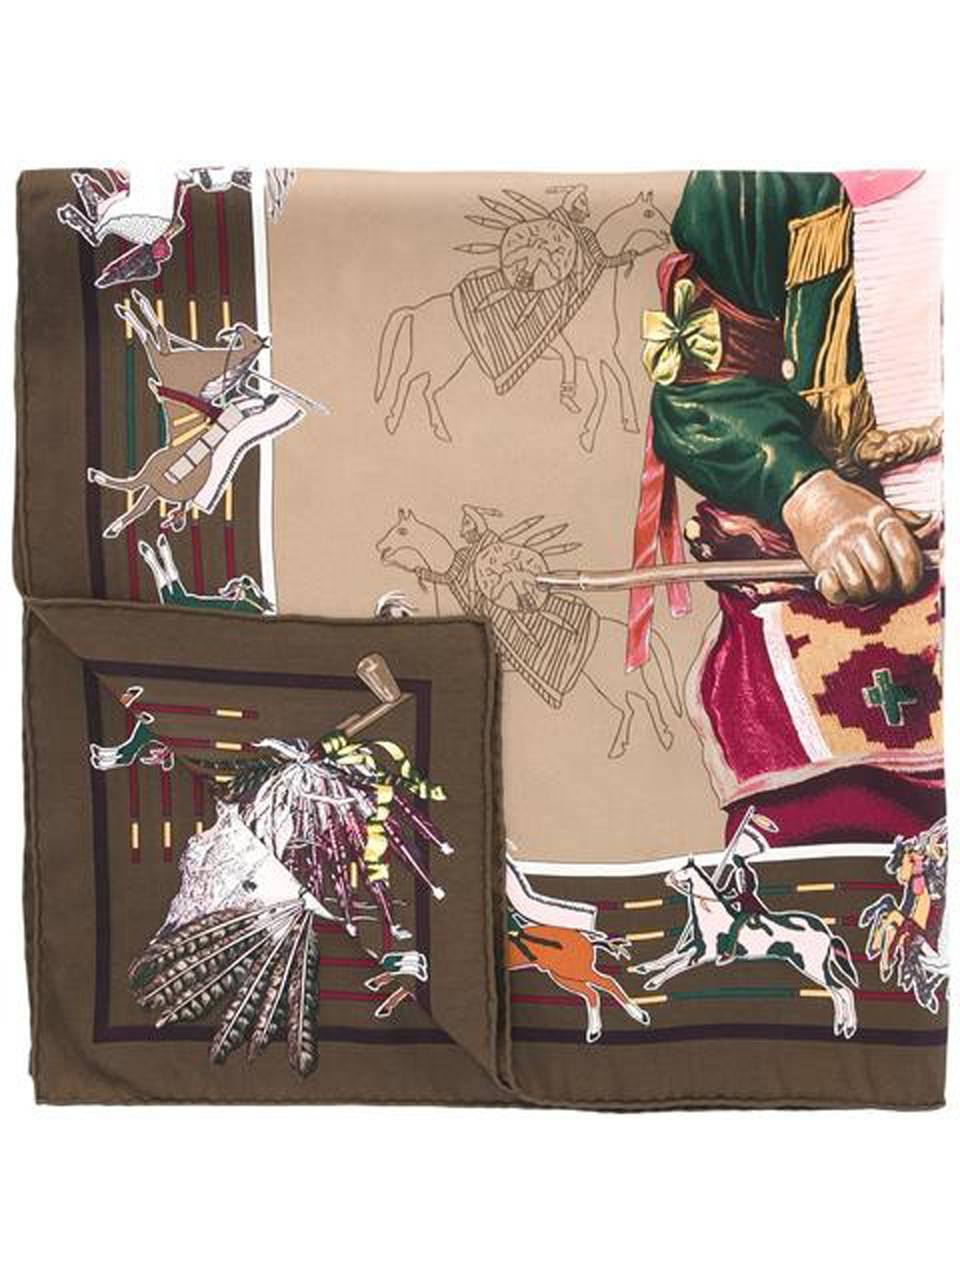 Hermès multico silk  “Pani La Shar Pawnee” scarf featuring an Indian scenic print. Pani La Shar Pawnee was designed by Oliver Kermit. Circa 1984. 
26,7in. (68cm) X 26,7in. (68cm)
In excellent vintage condition. Made in France.
We guarantee you will